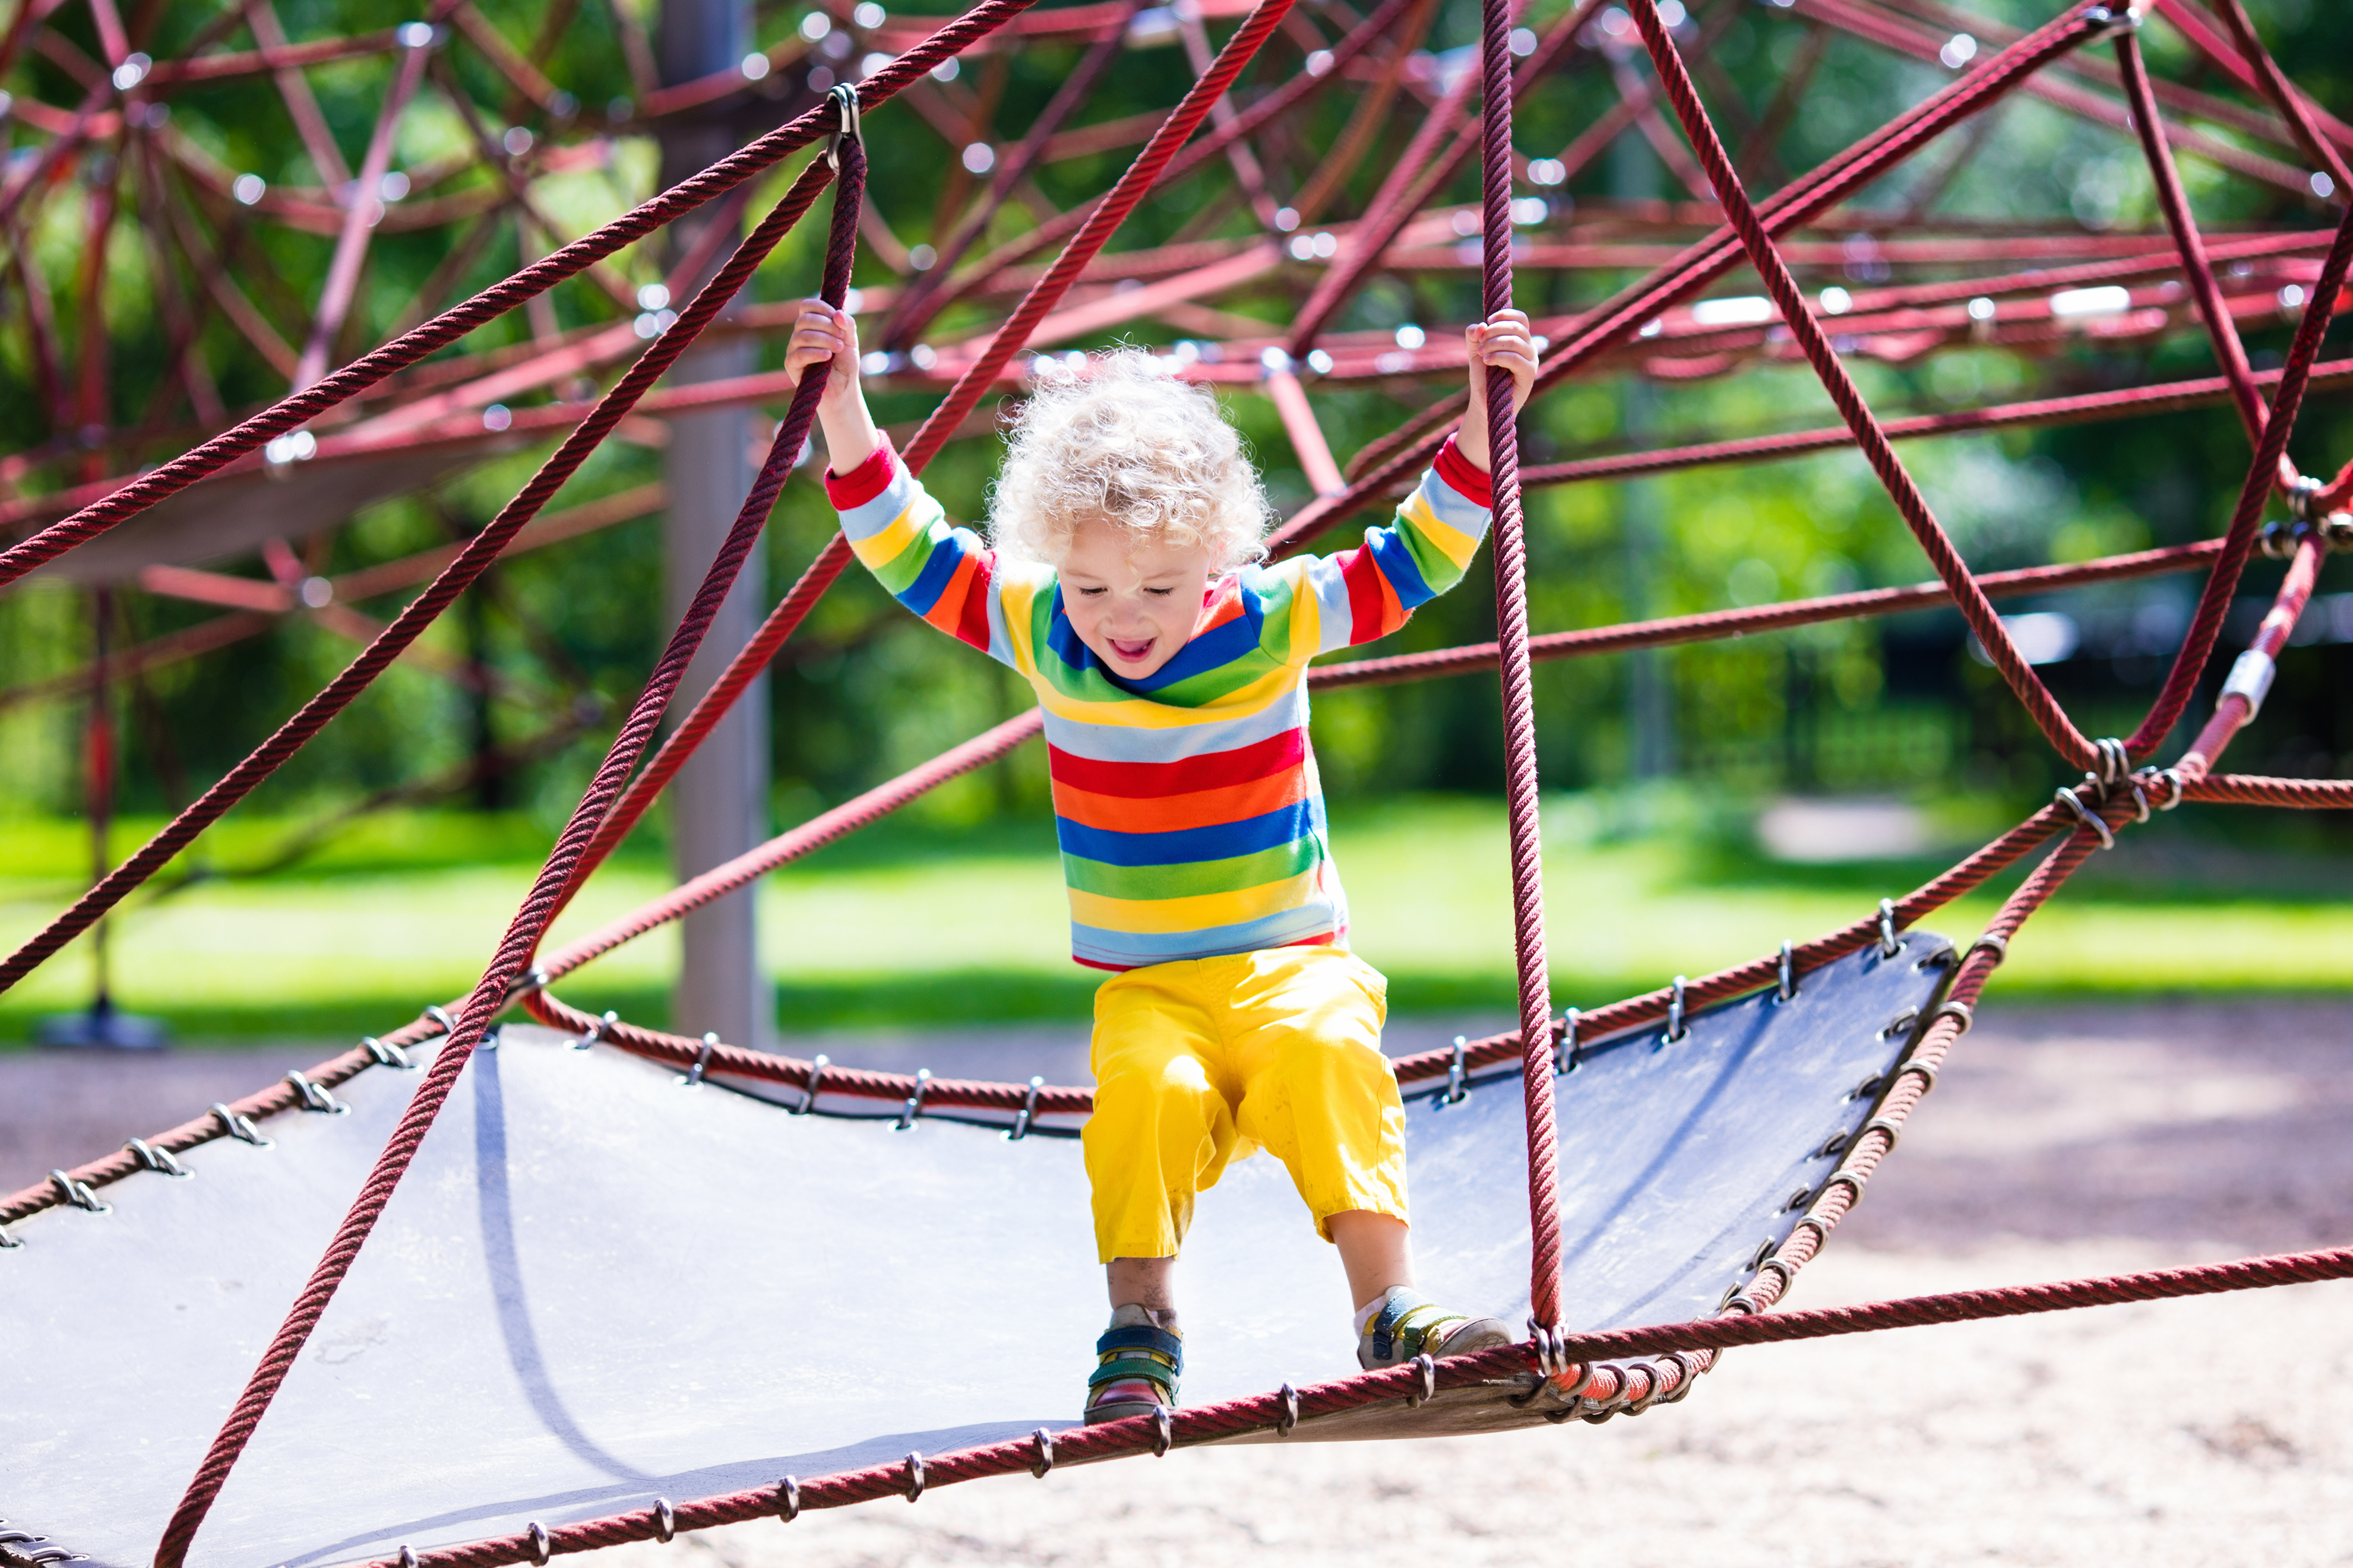 Rubber is the newest trend in playground equipment, Blog Post